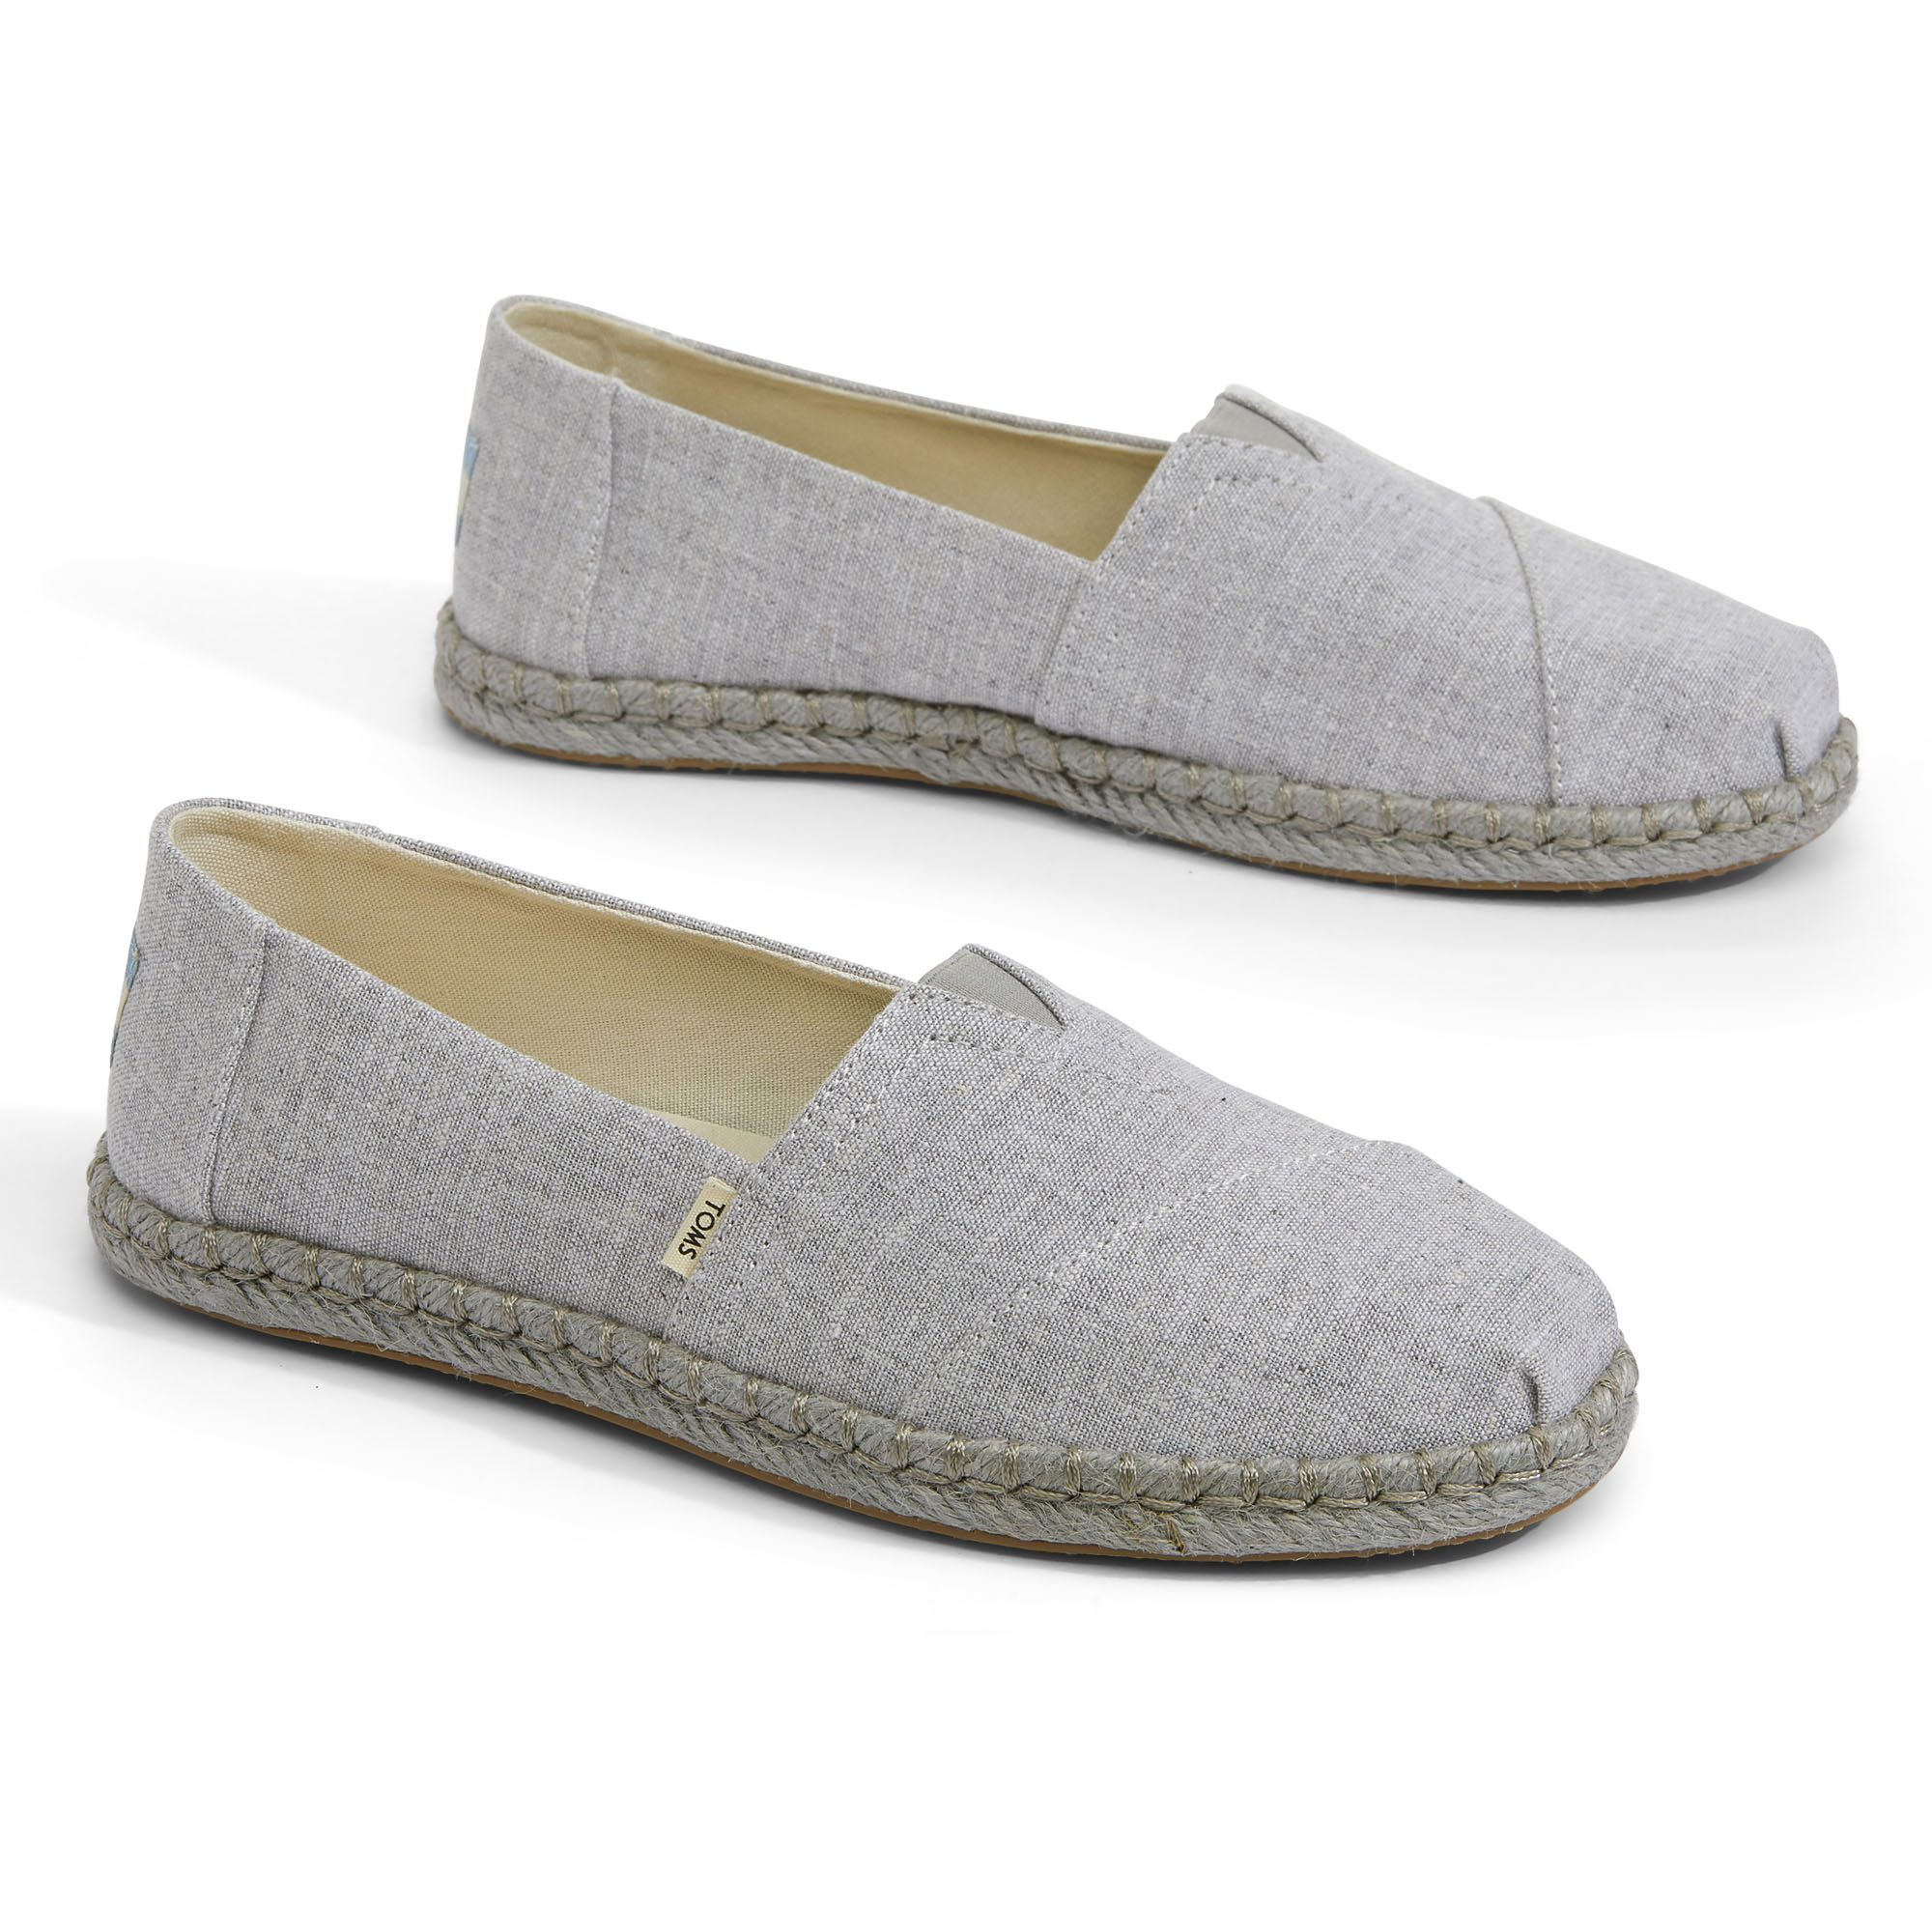 toms casual shoes